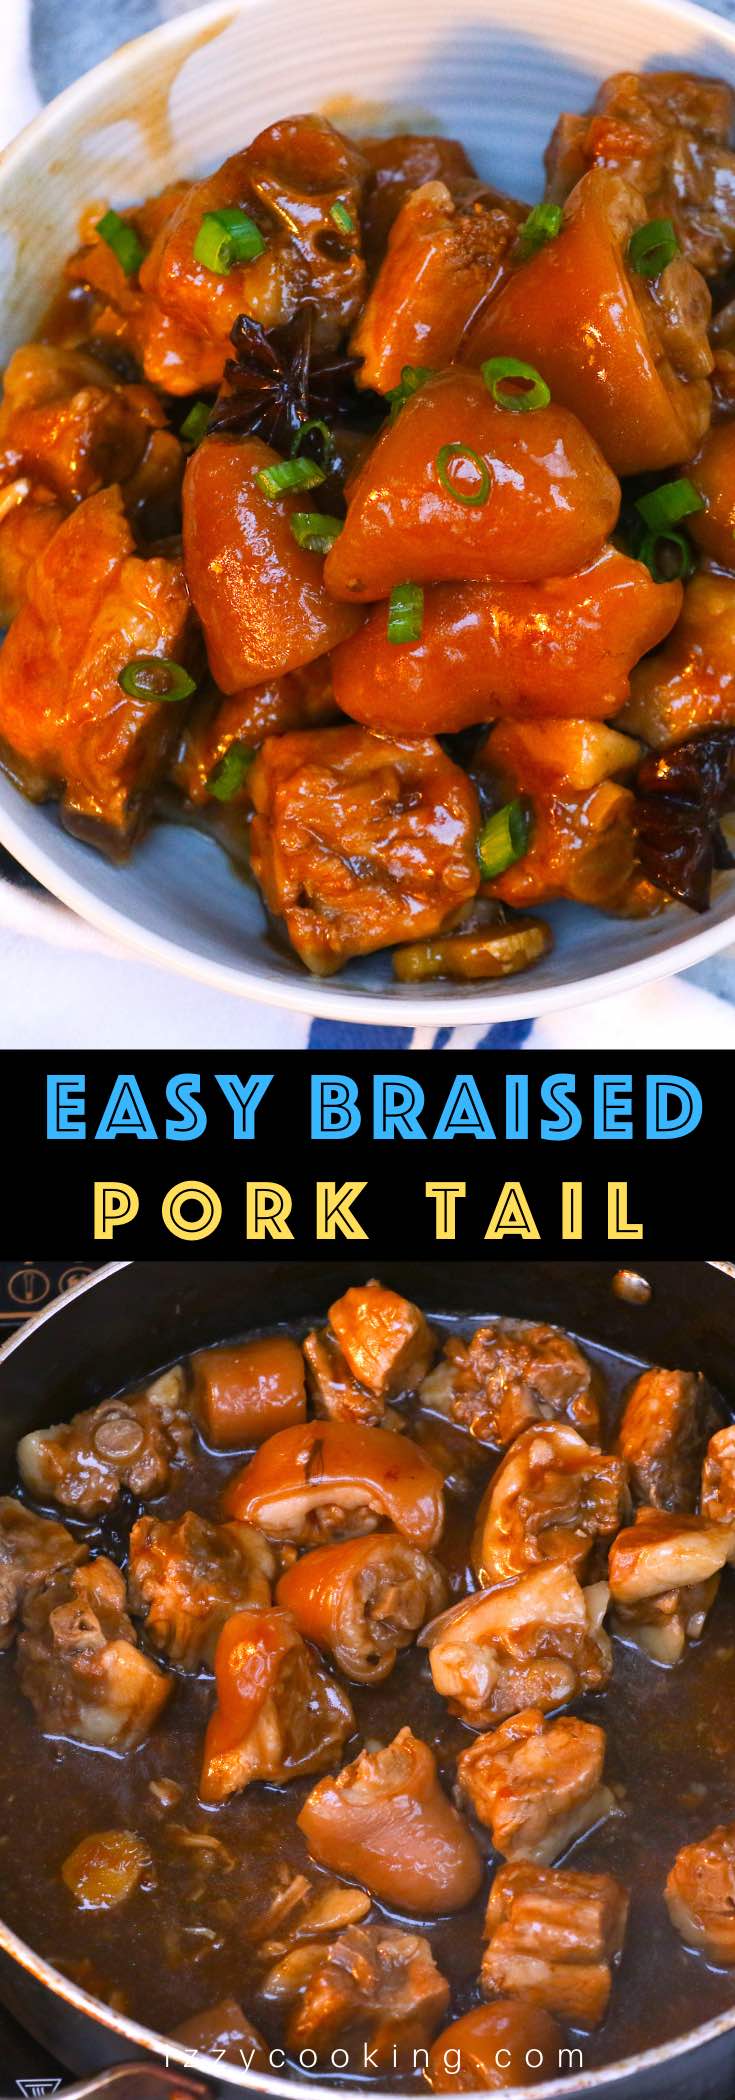 Braised Pig’s Tail is sticky, tender, and melt-in-your-mouth delicious. The pork tails are cooked low and slow in a rich and flavorful soup on the stove. This Chinese style pigtail’s recipe is so easy to make and one of my favorite Asian food. 